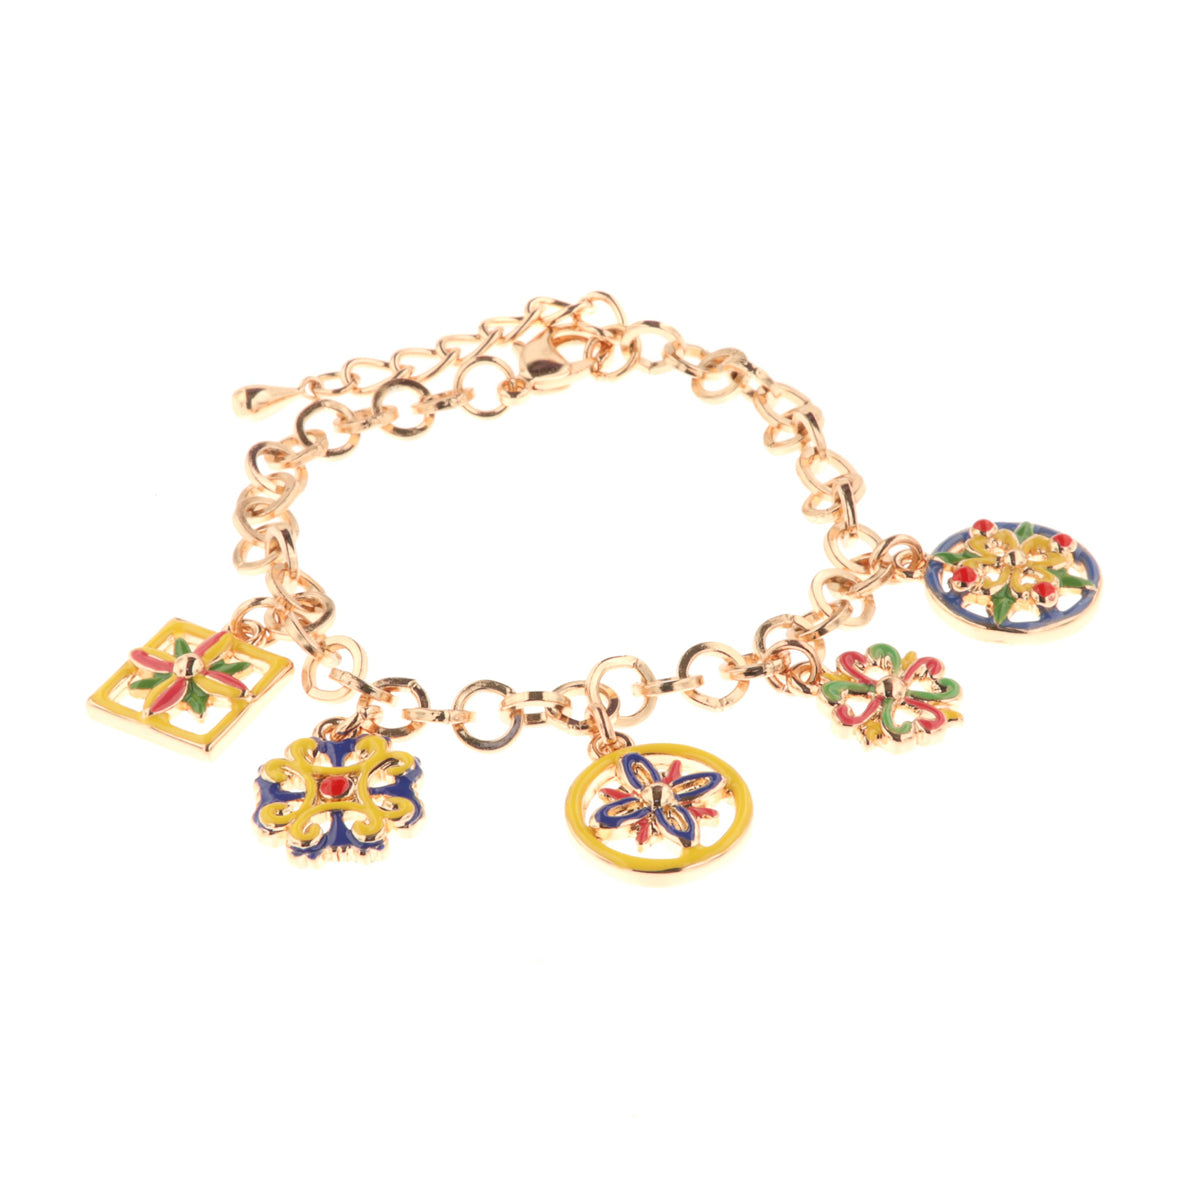 Metal bracelet with colored majolica -shaped pendants